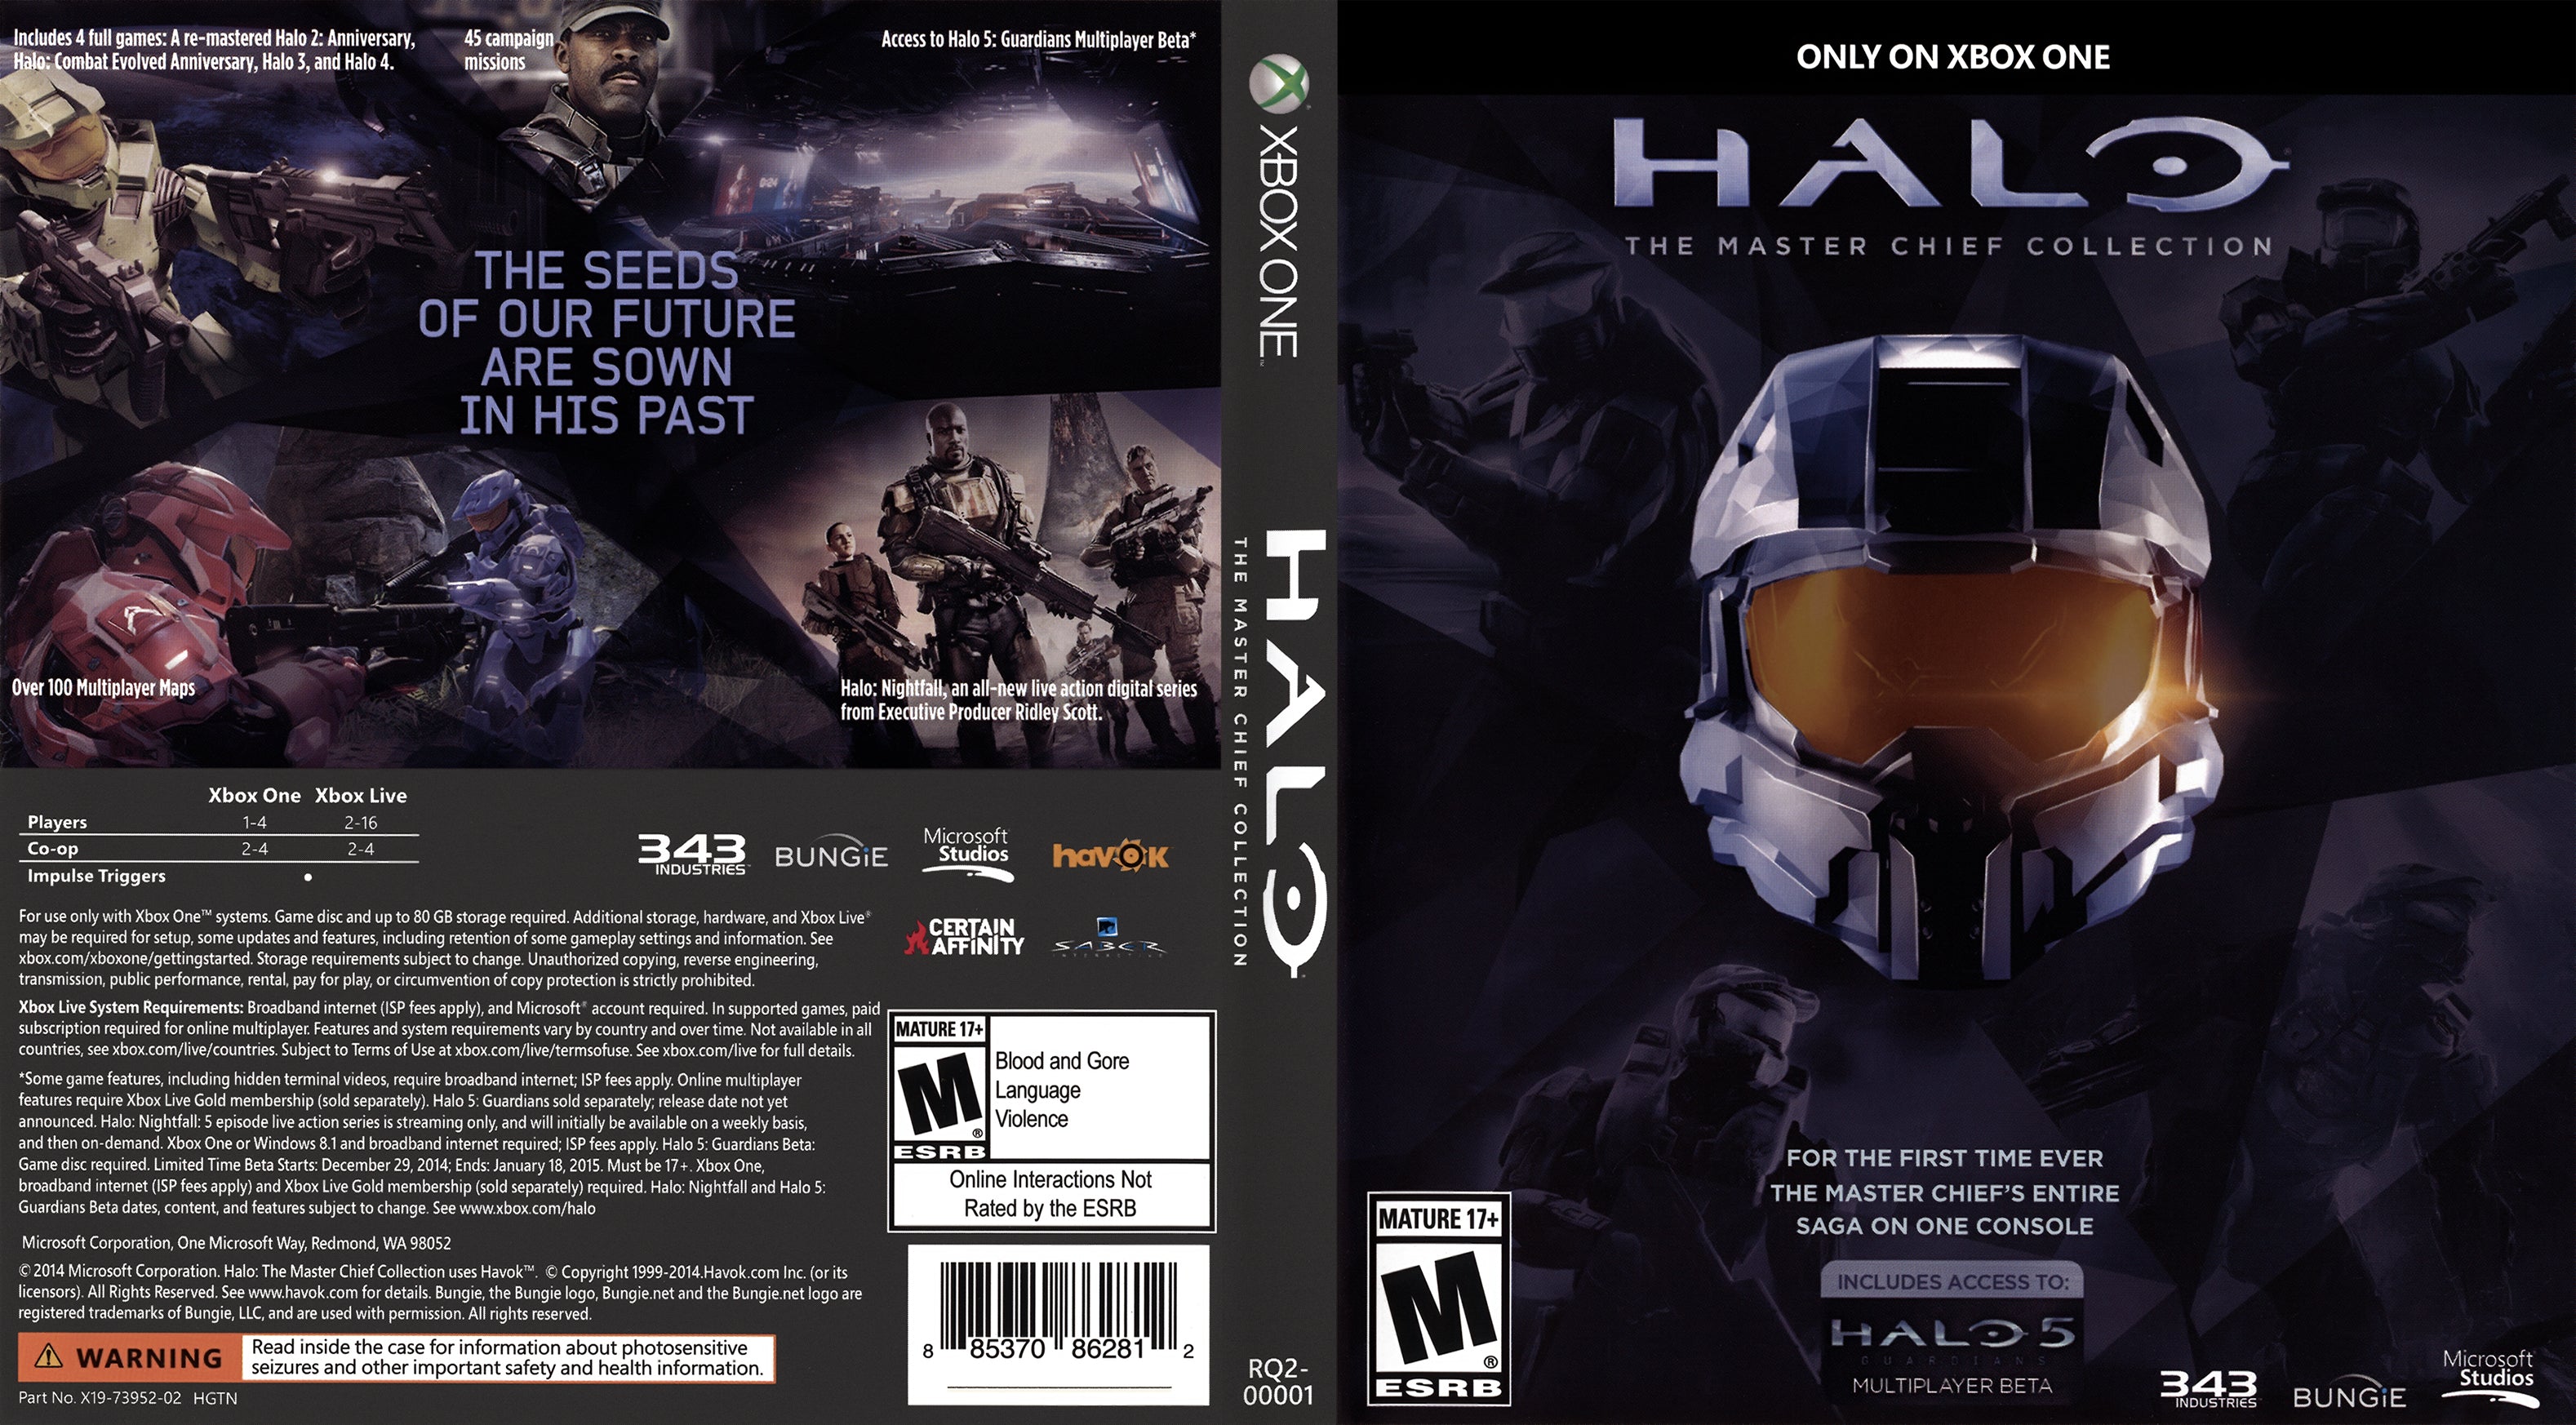 Microsoft Halo: The Master Chief Collection, Xbox One